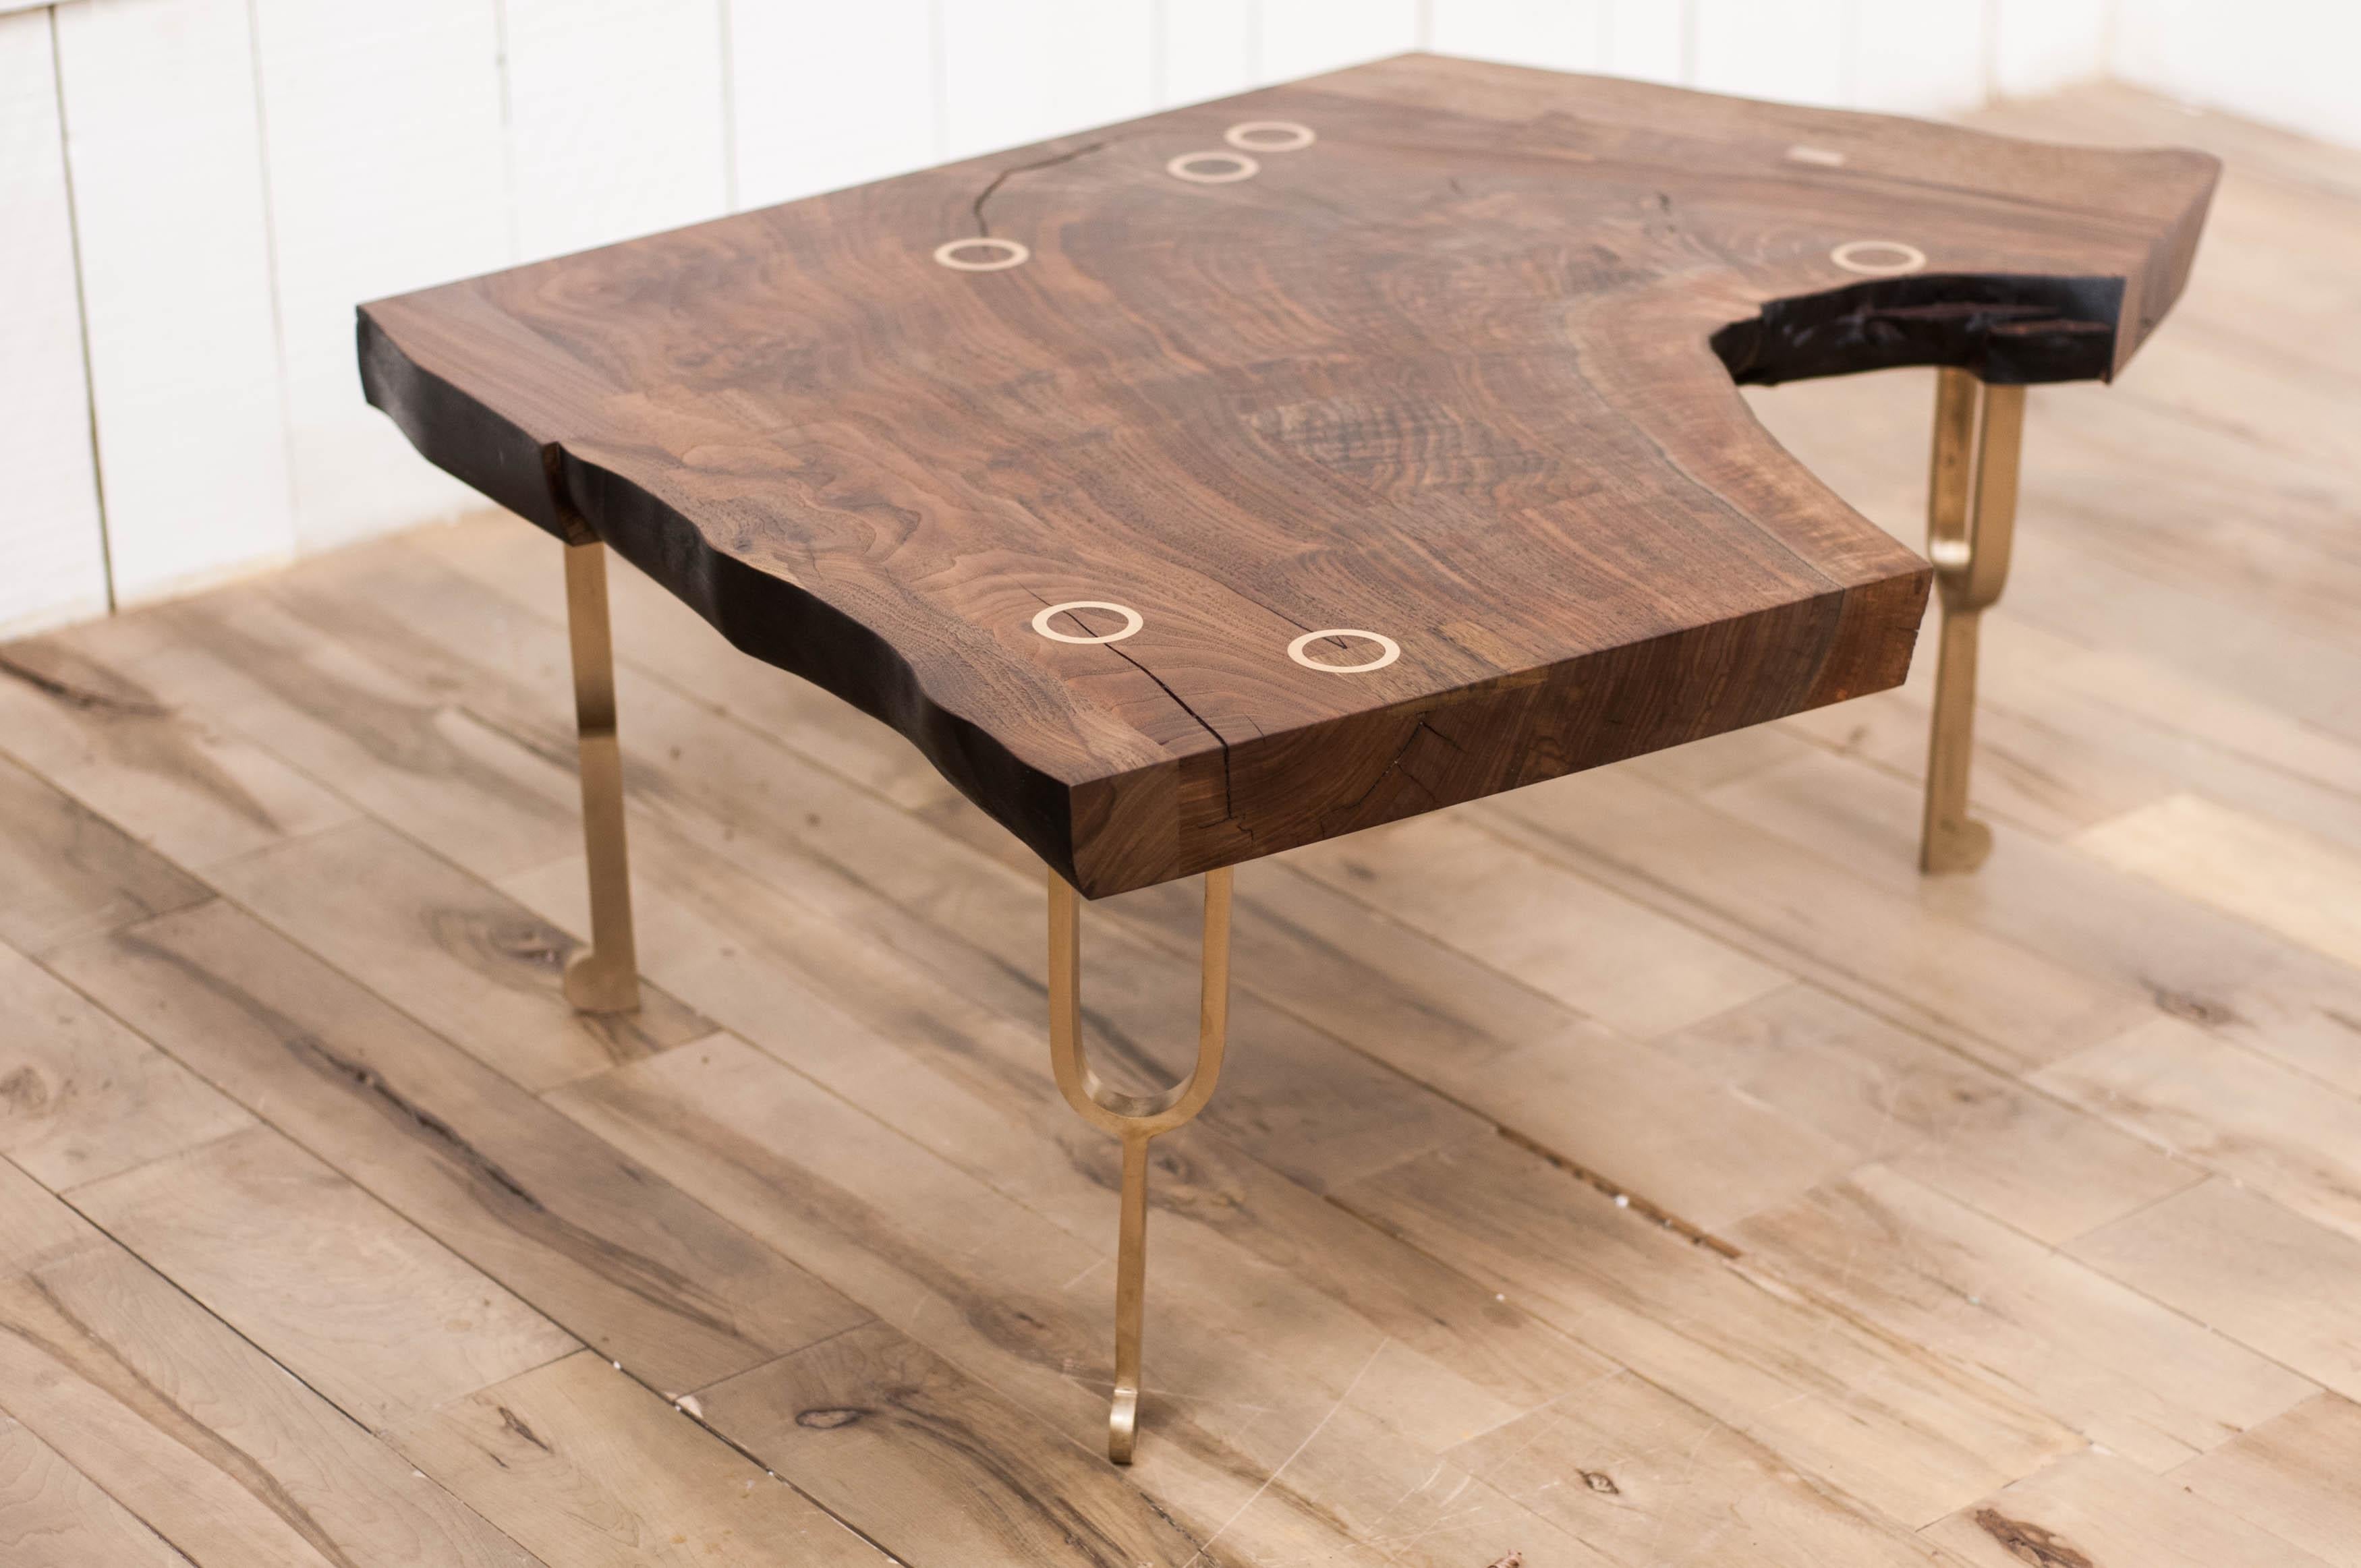 Tuning Fork Coffee Table in Satin Cast Bronze and Claro Walnut 1